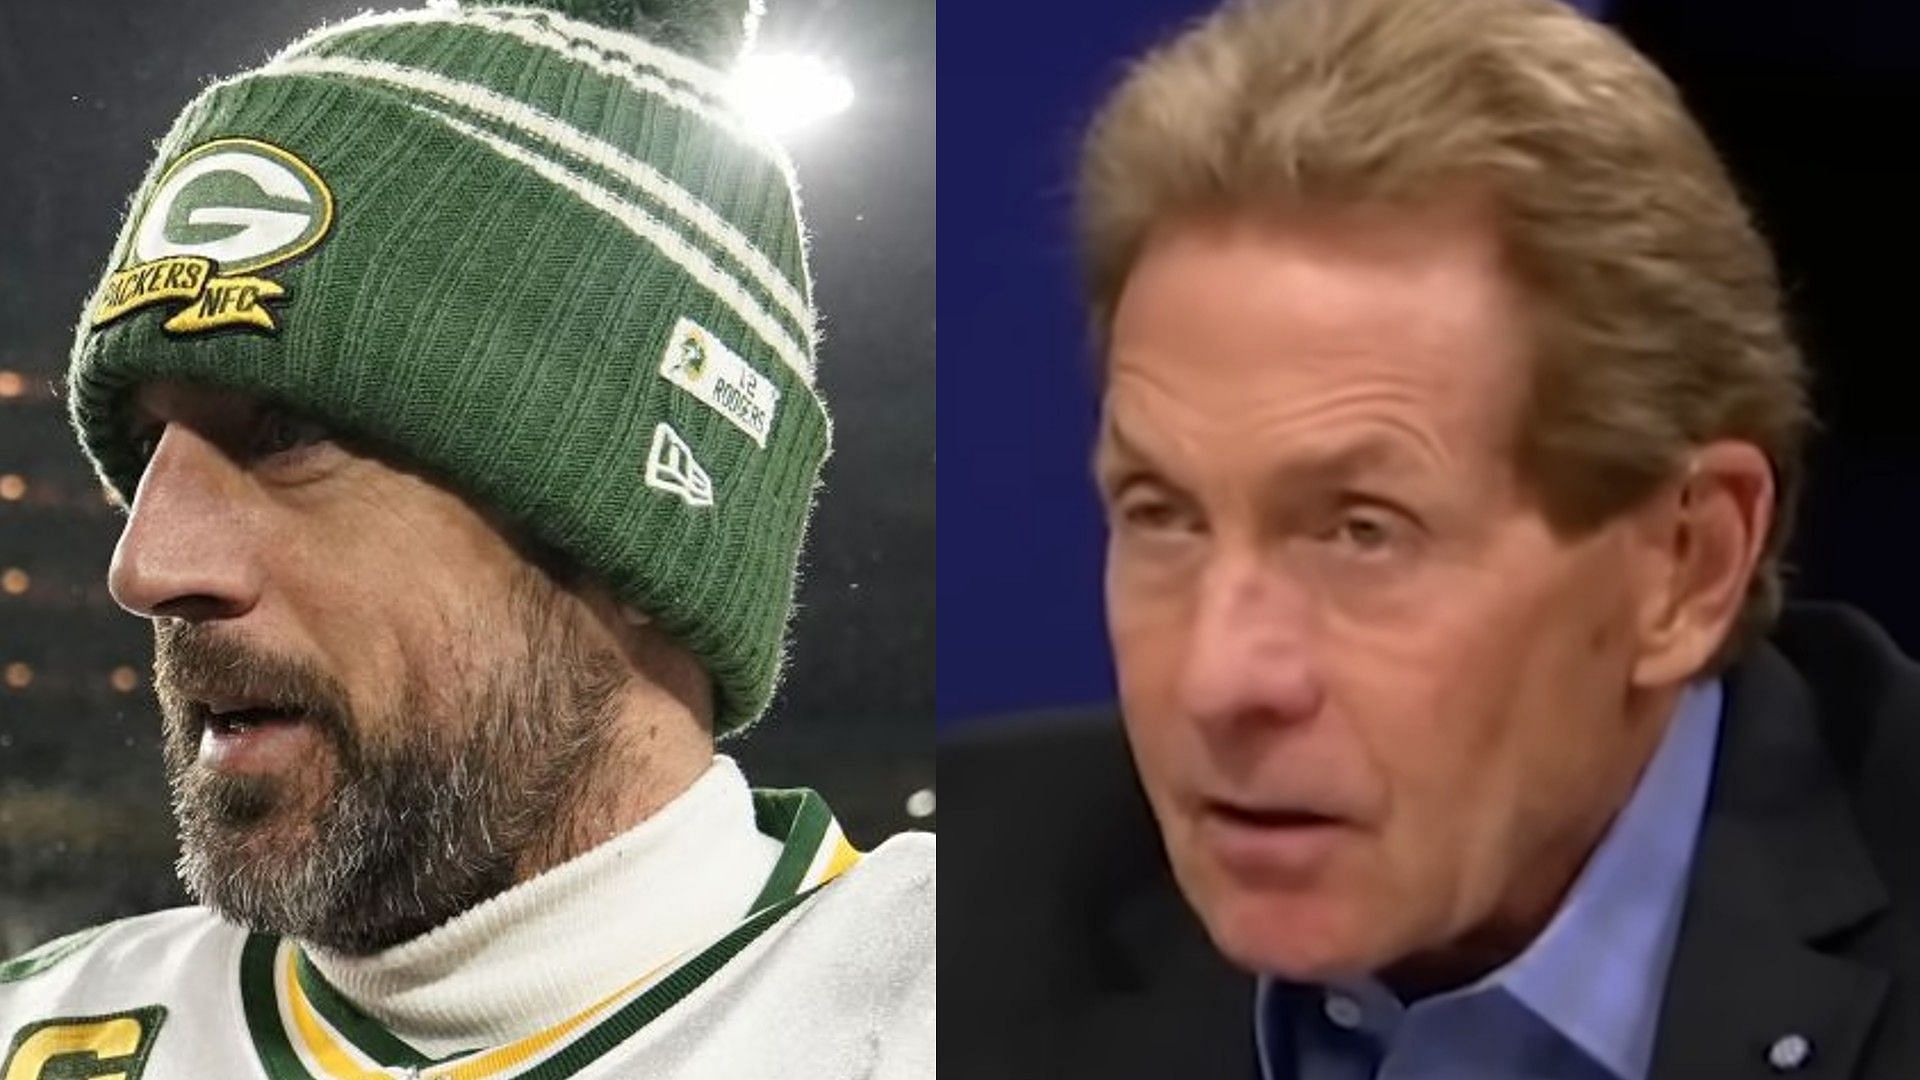 Skip Bayless sets low expectations for Aaron Rodgers - Courtesy of Undisputed on YouTube